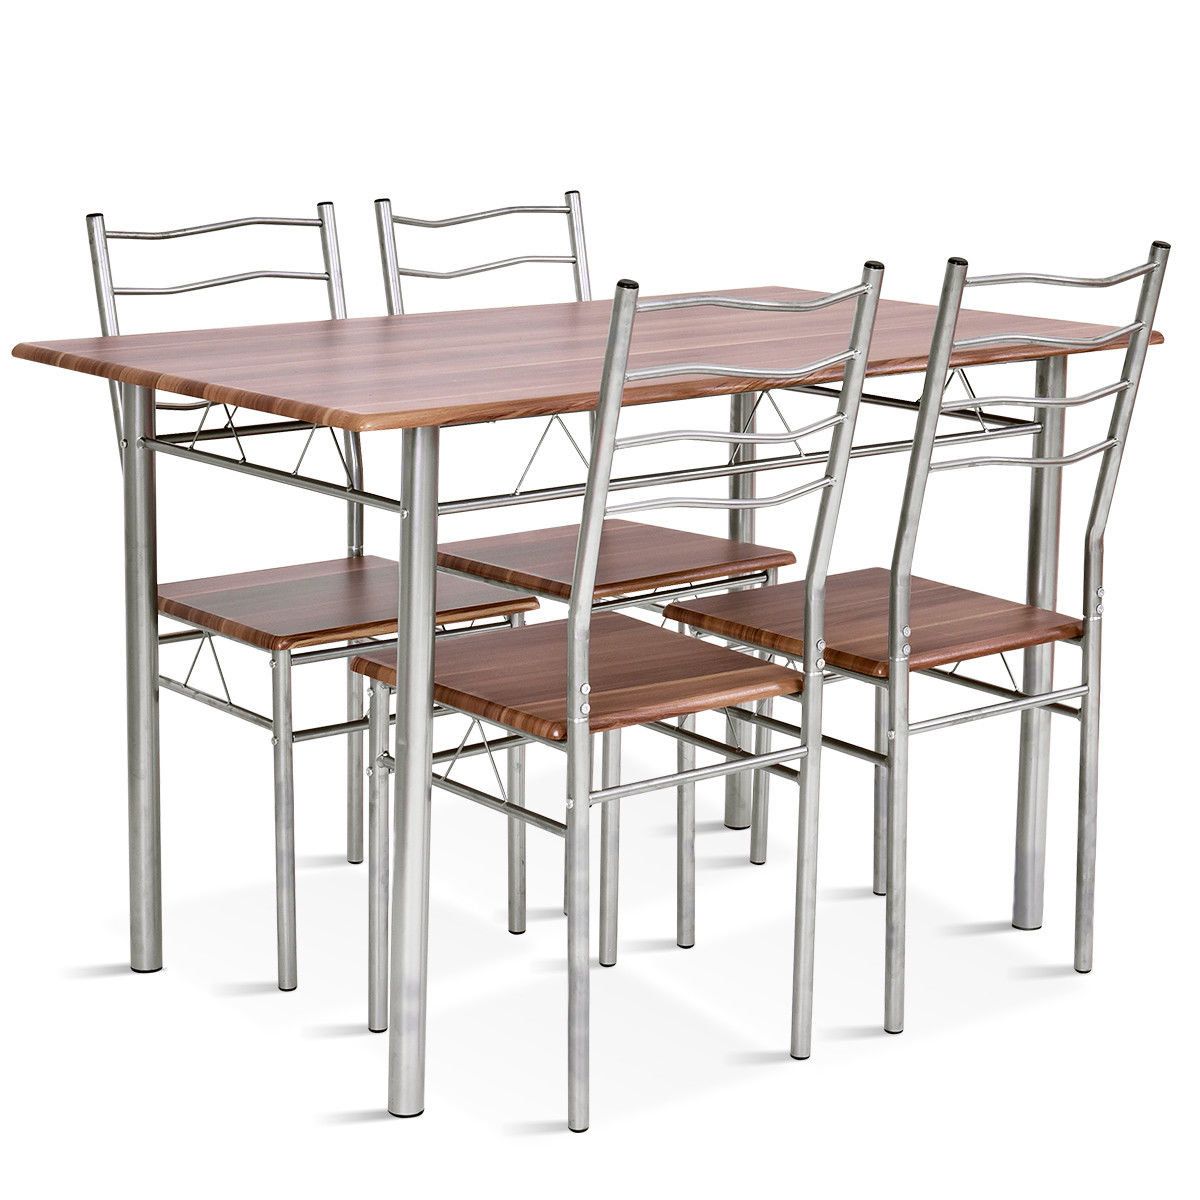 Casiano 5 Piece Dining Set In Popular Middleport 5 Piece Dining Sets (View 11 of 20)